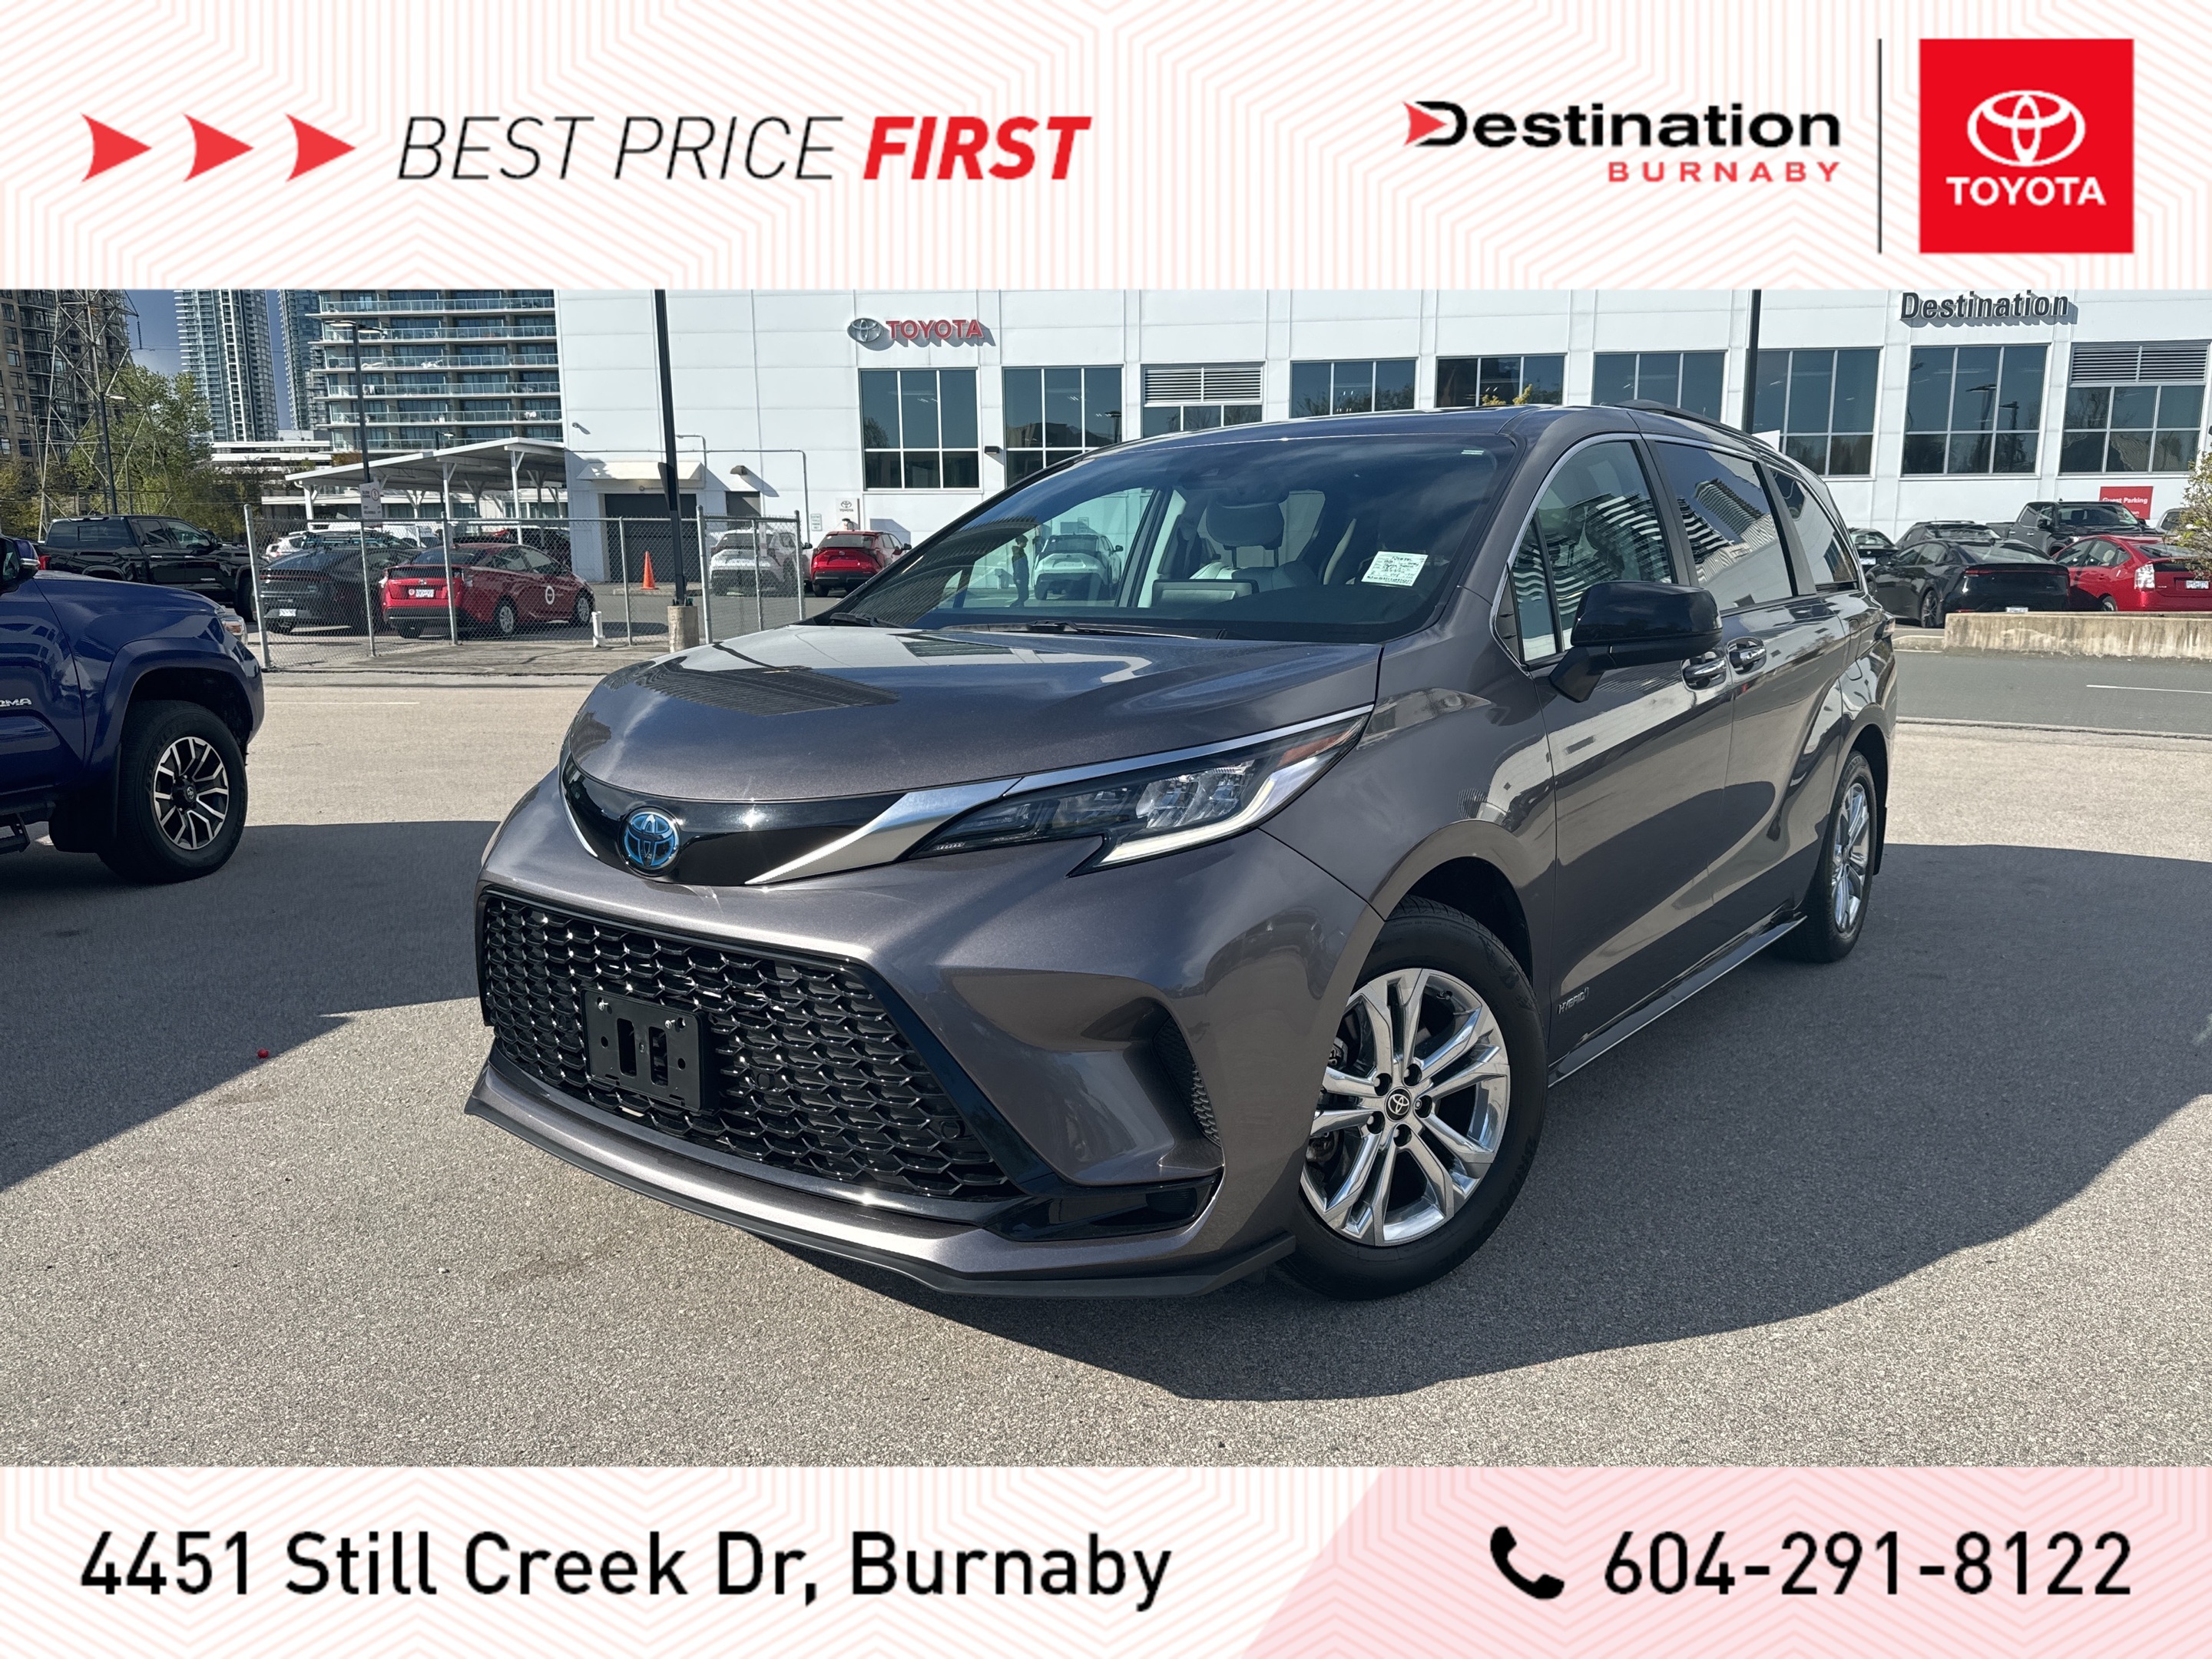 2021 Toyota Sienna XSE AWD - 1 owner, no accidents. Toyota Certified!